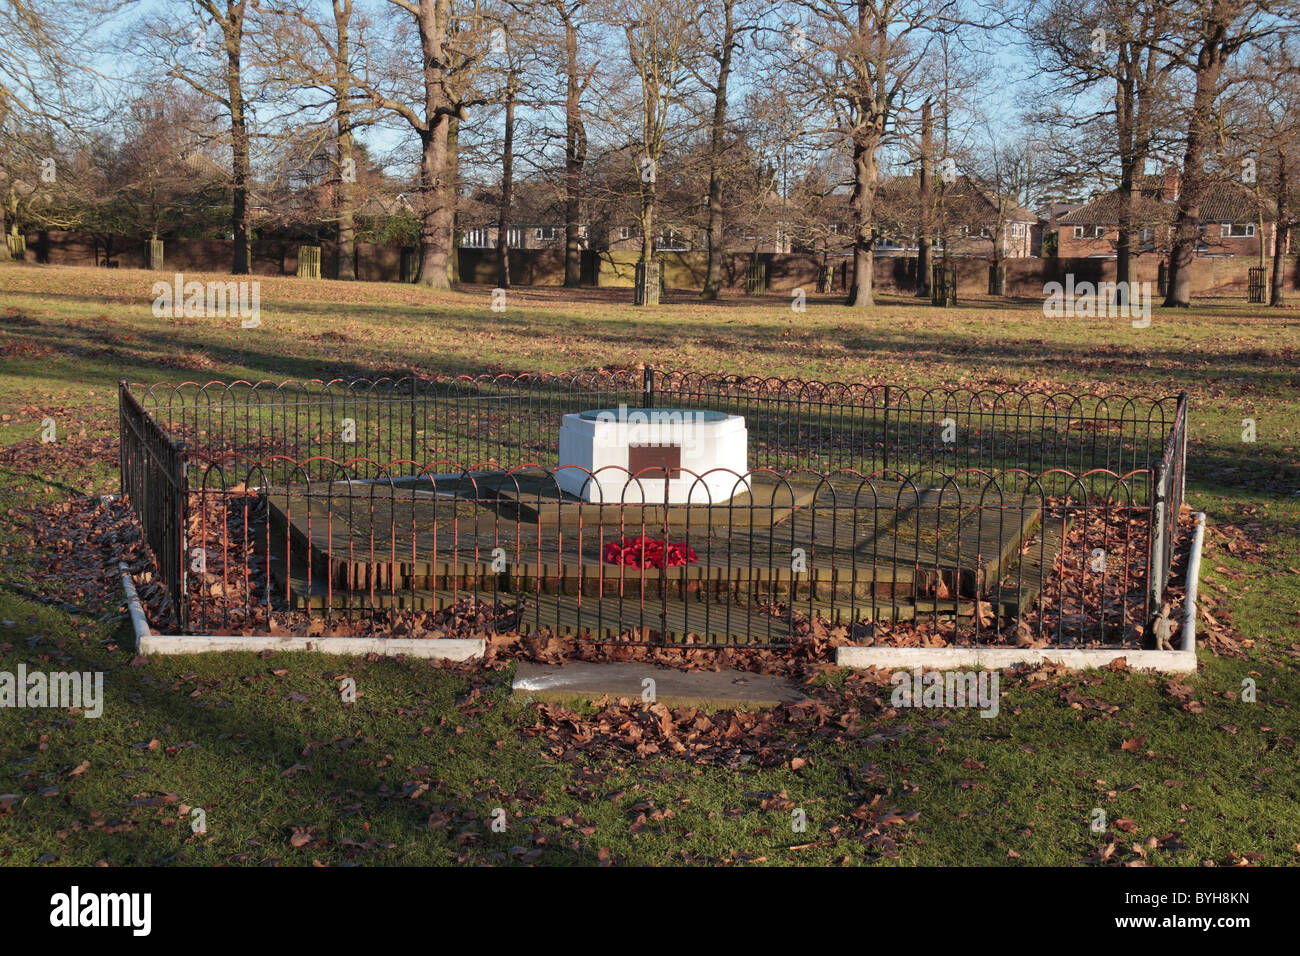 Memorial marker to the United States Army Air Forces WWII base in Bushy Park, West London, UK. Stock Photo